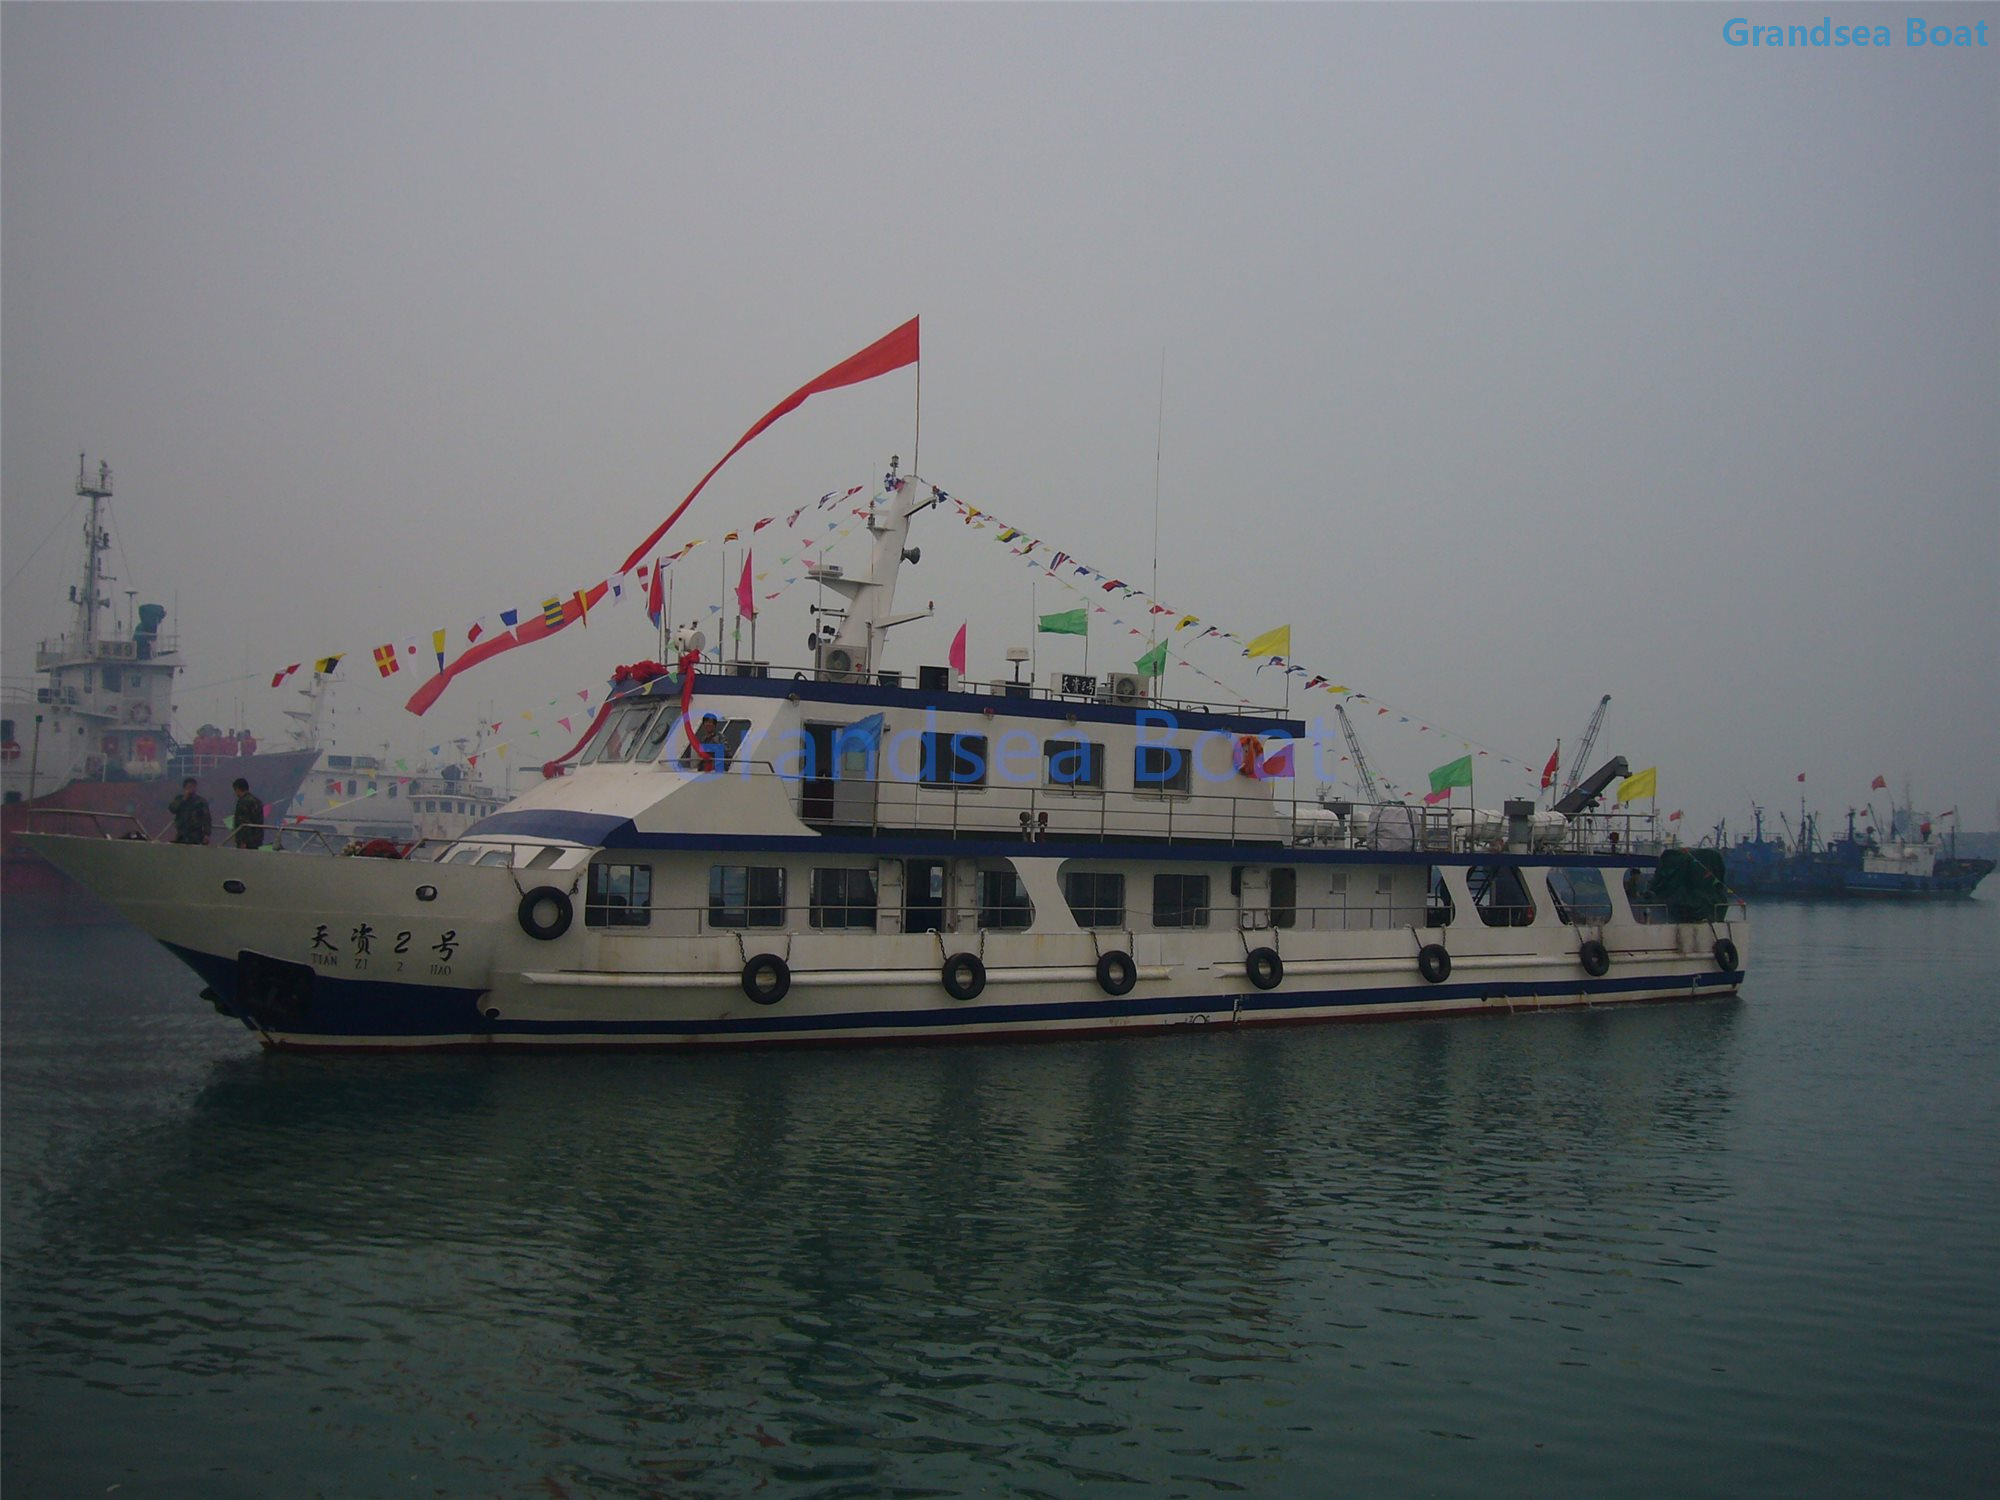 36m 200persons Steel Hull Passenger Ferry Ship for Sale